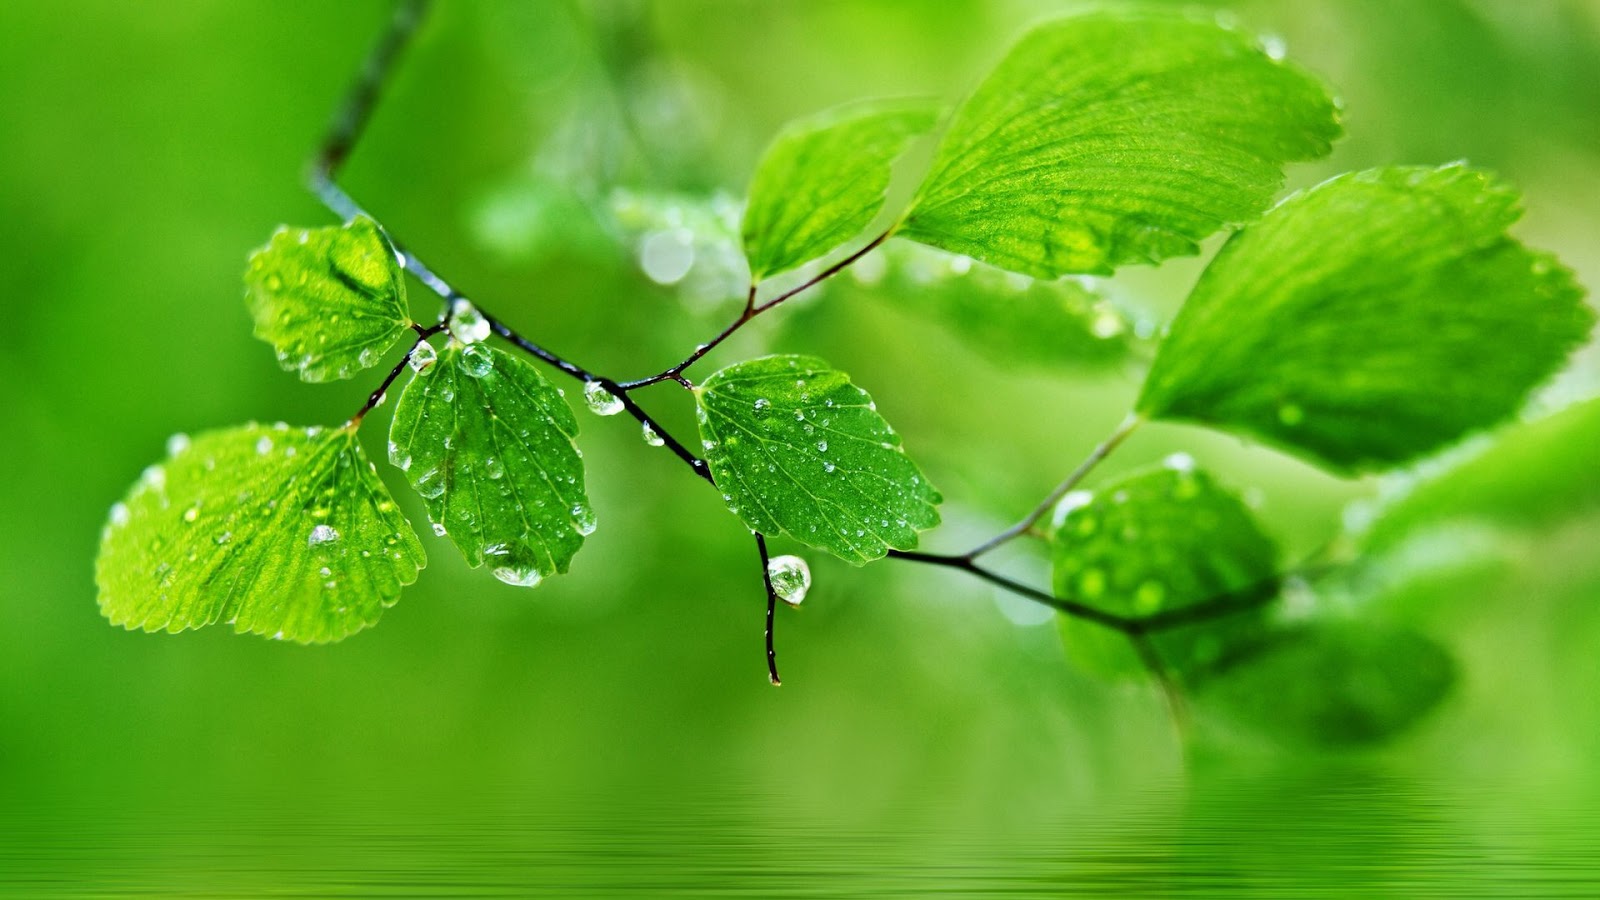 Water Drops On Leaves Hd Desktop Wallpapers For Android Top Level